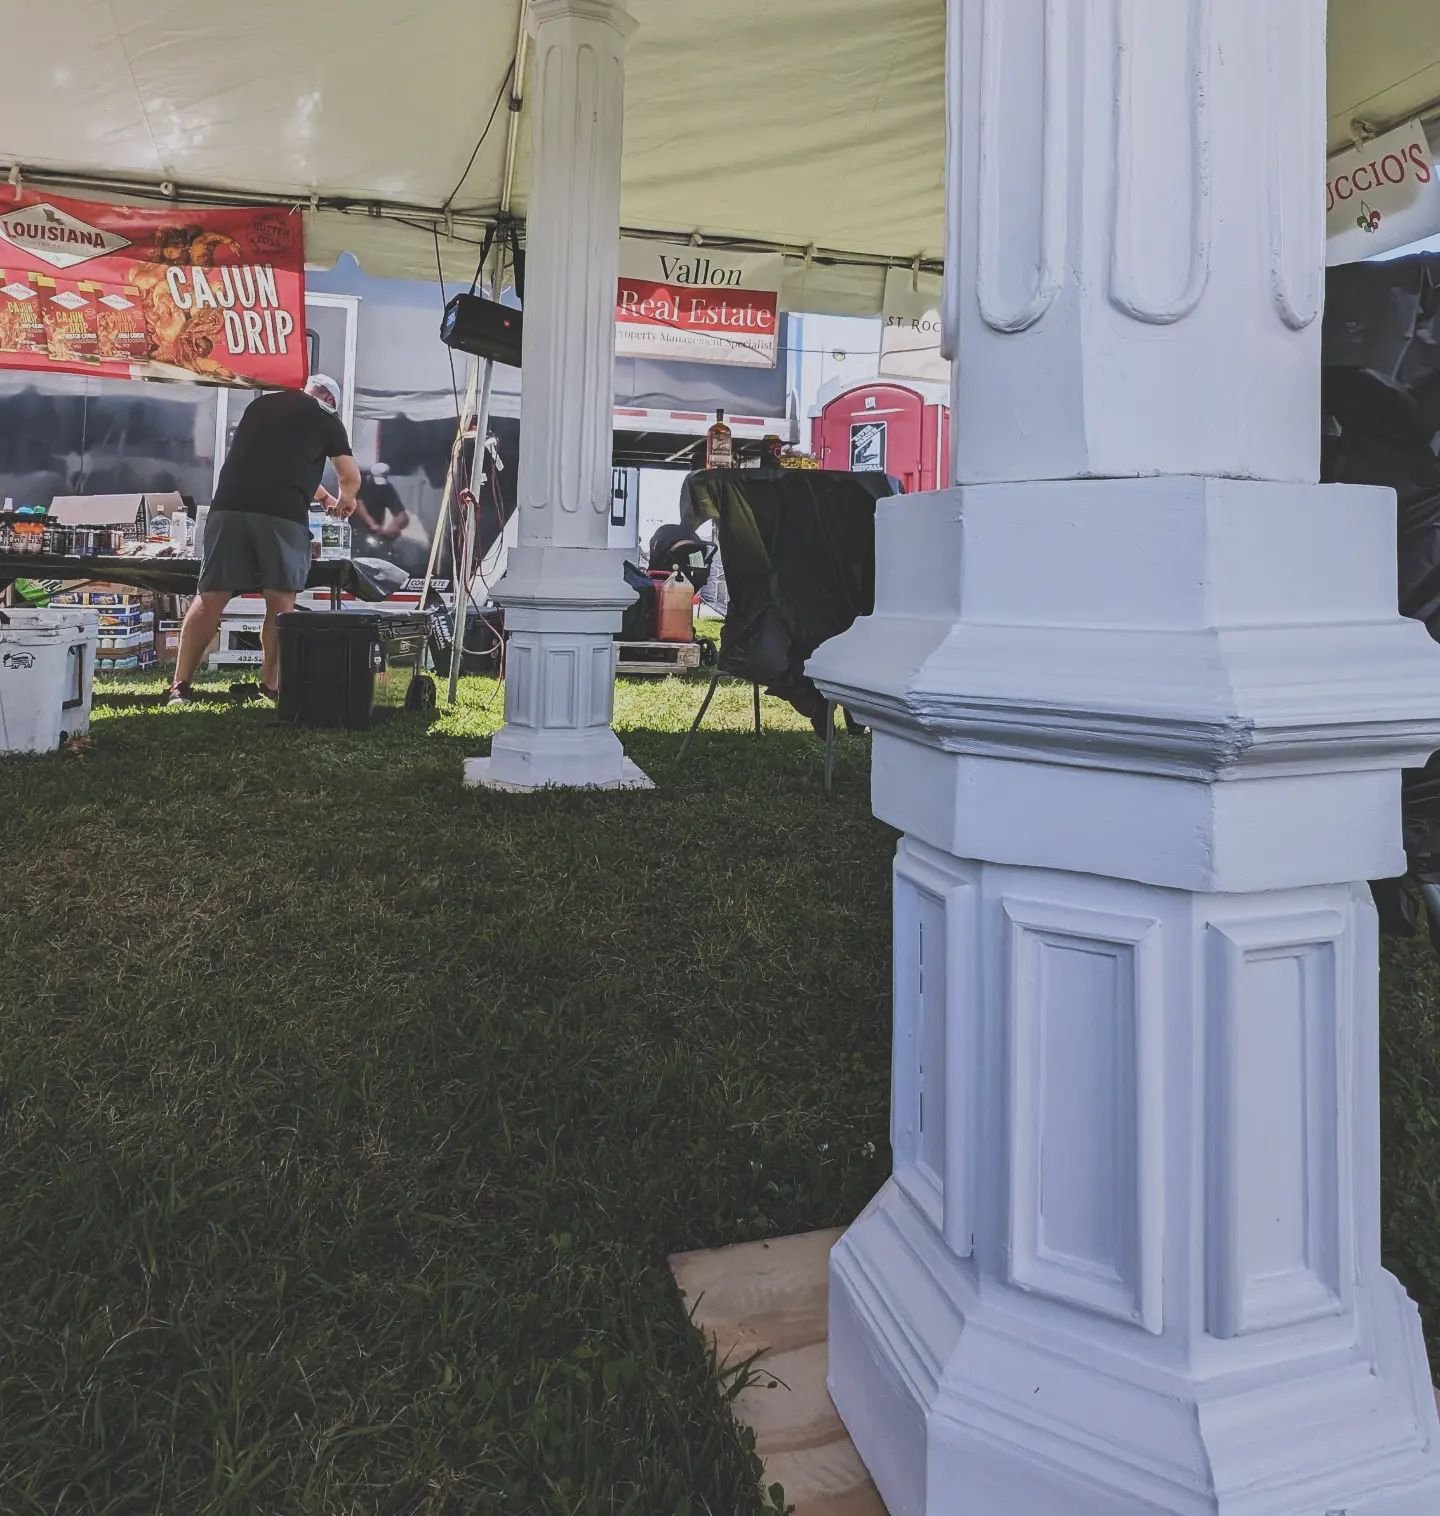 We had @undercovercoatings build replicas of our columns for events that we sponsor around town. They're making their first appearance @cheftungnguyen 's Pork You Long Time booth @hogsforthecause if you come out this weekend come check them out. 

#m